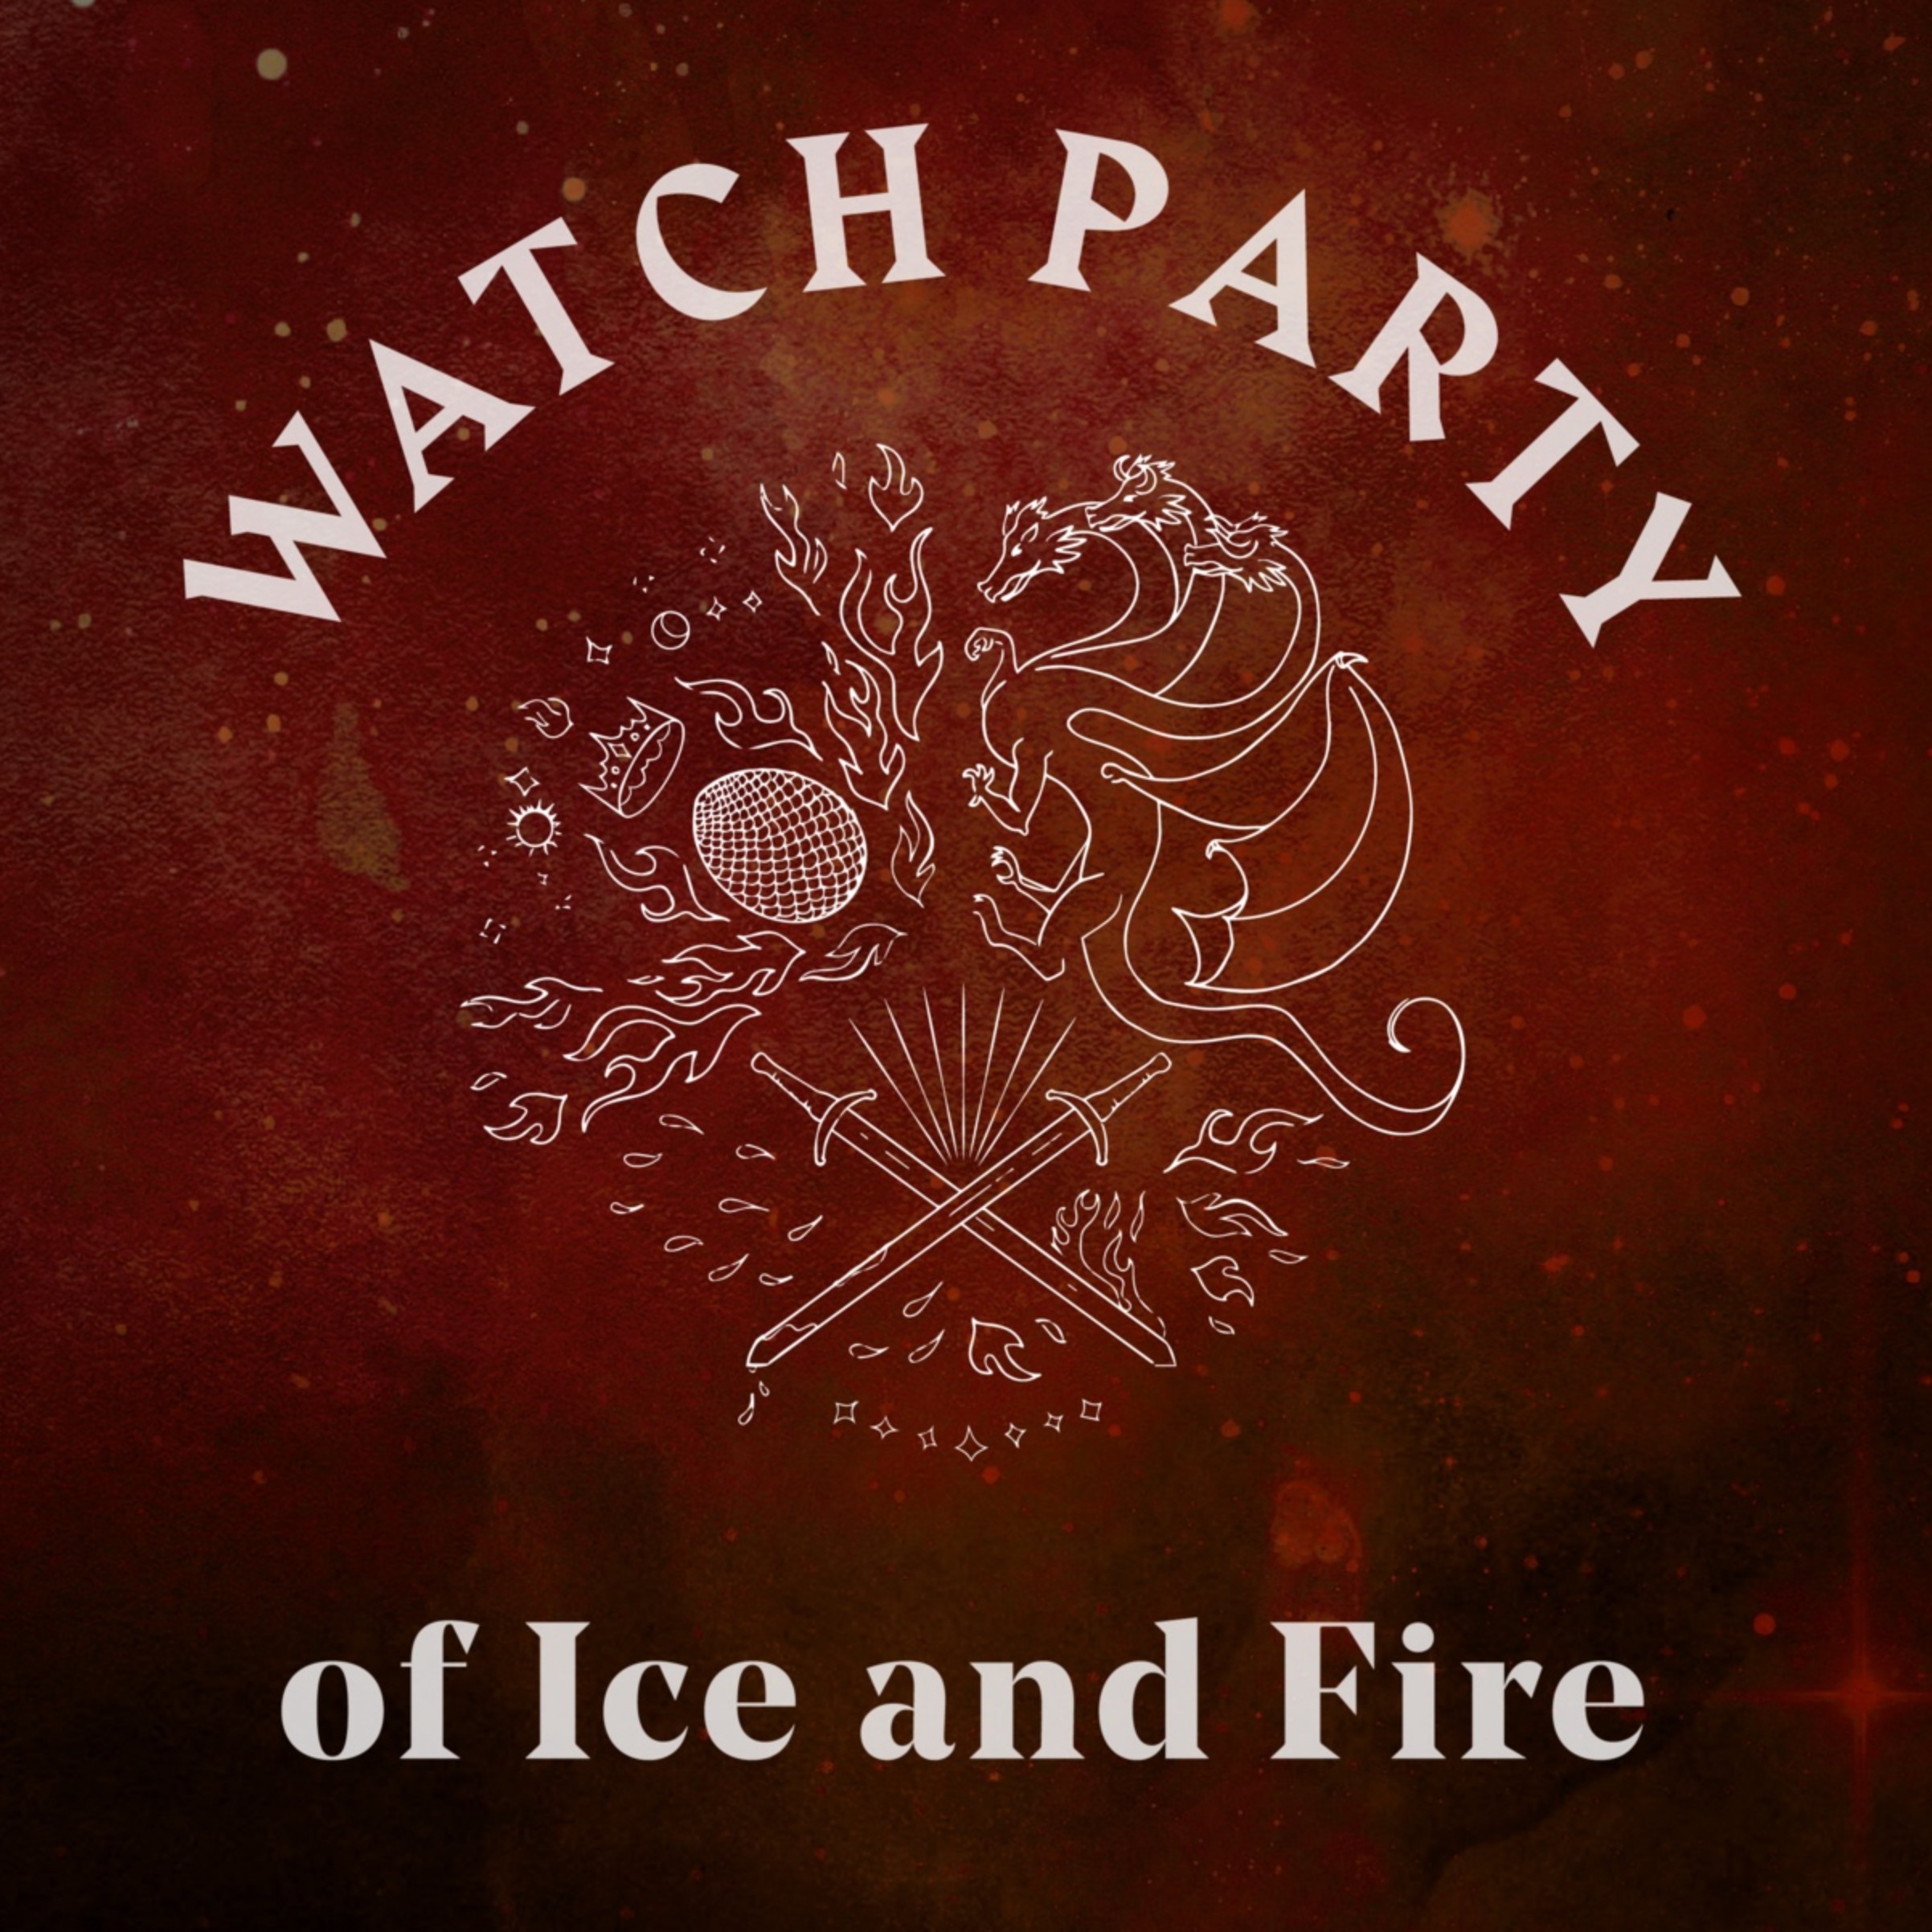 A Watch Party of Ice and Fire